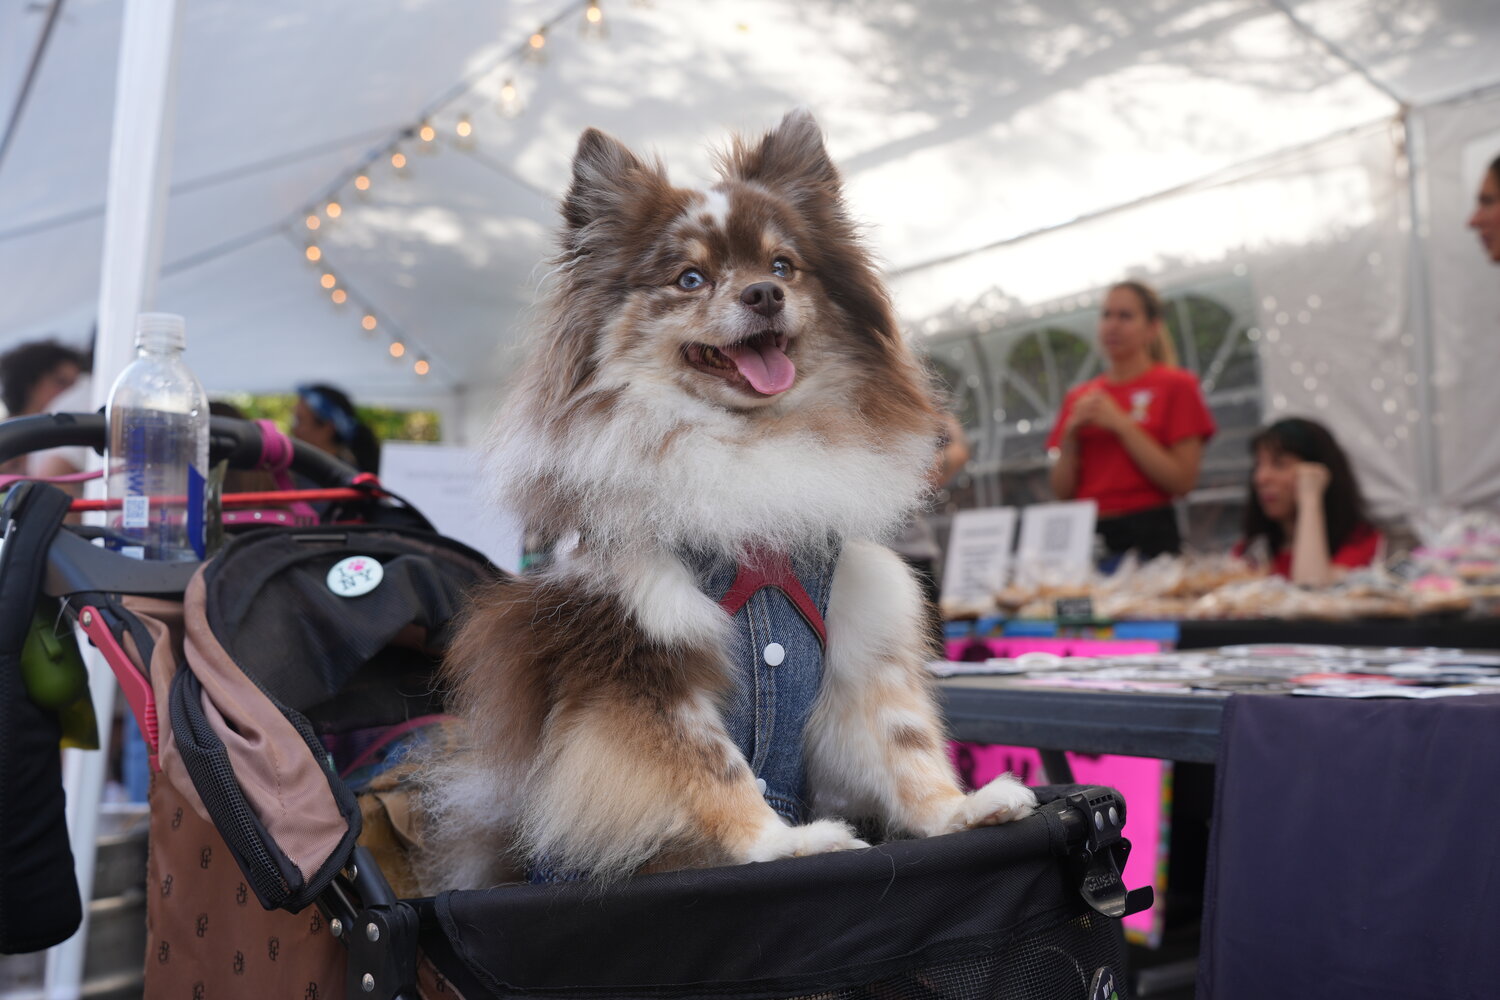 Truffles, in a wagon, got to meet lots of people who stopped by the event.